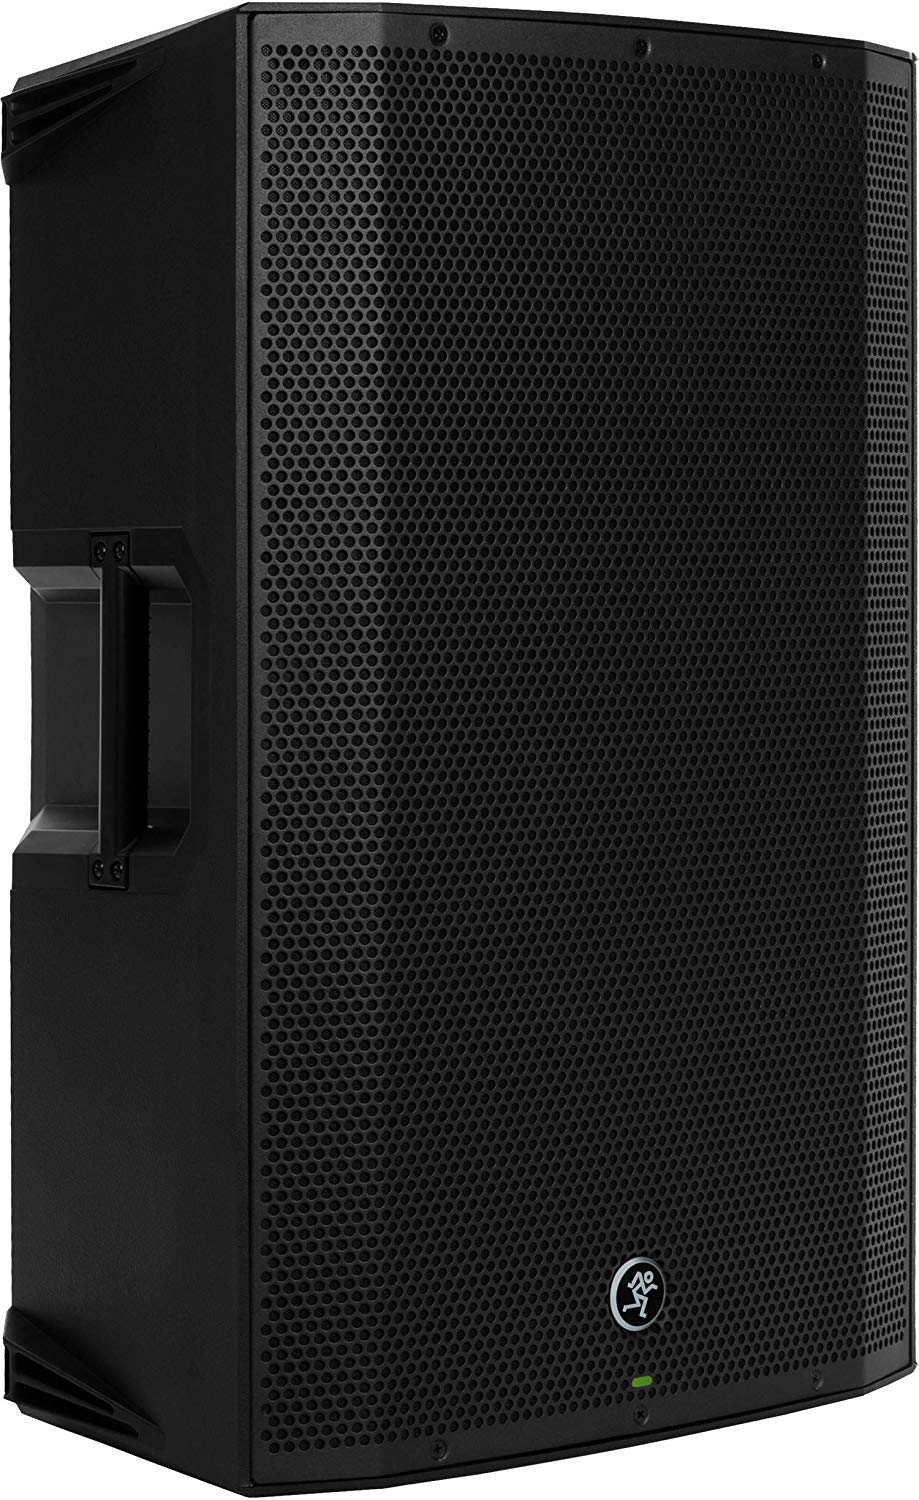 Discontinued: Mackie Thump15A 15 Inch Powered Loudspeaker by Mackie